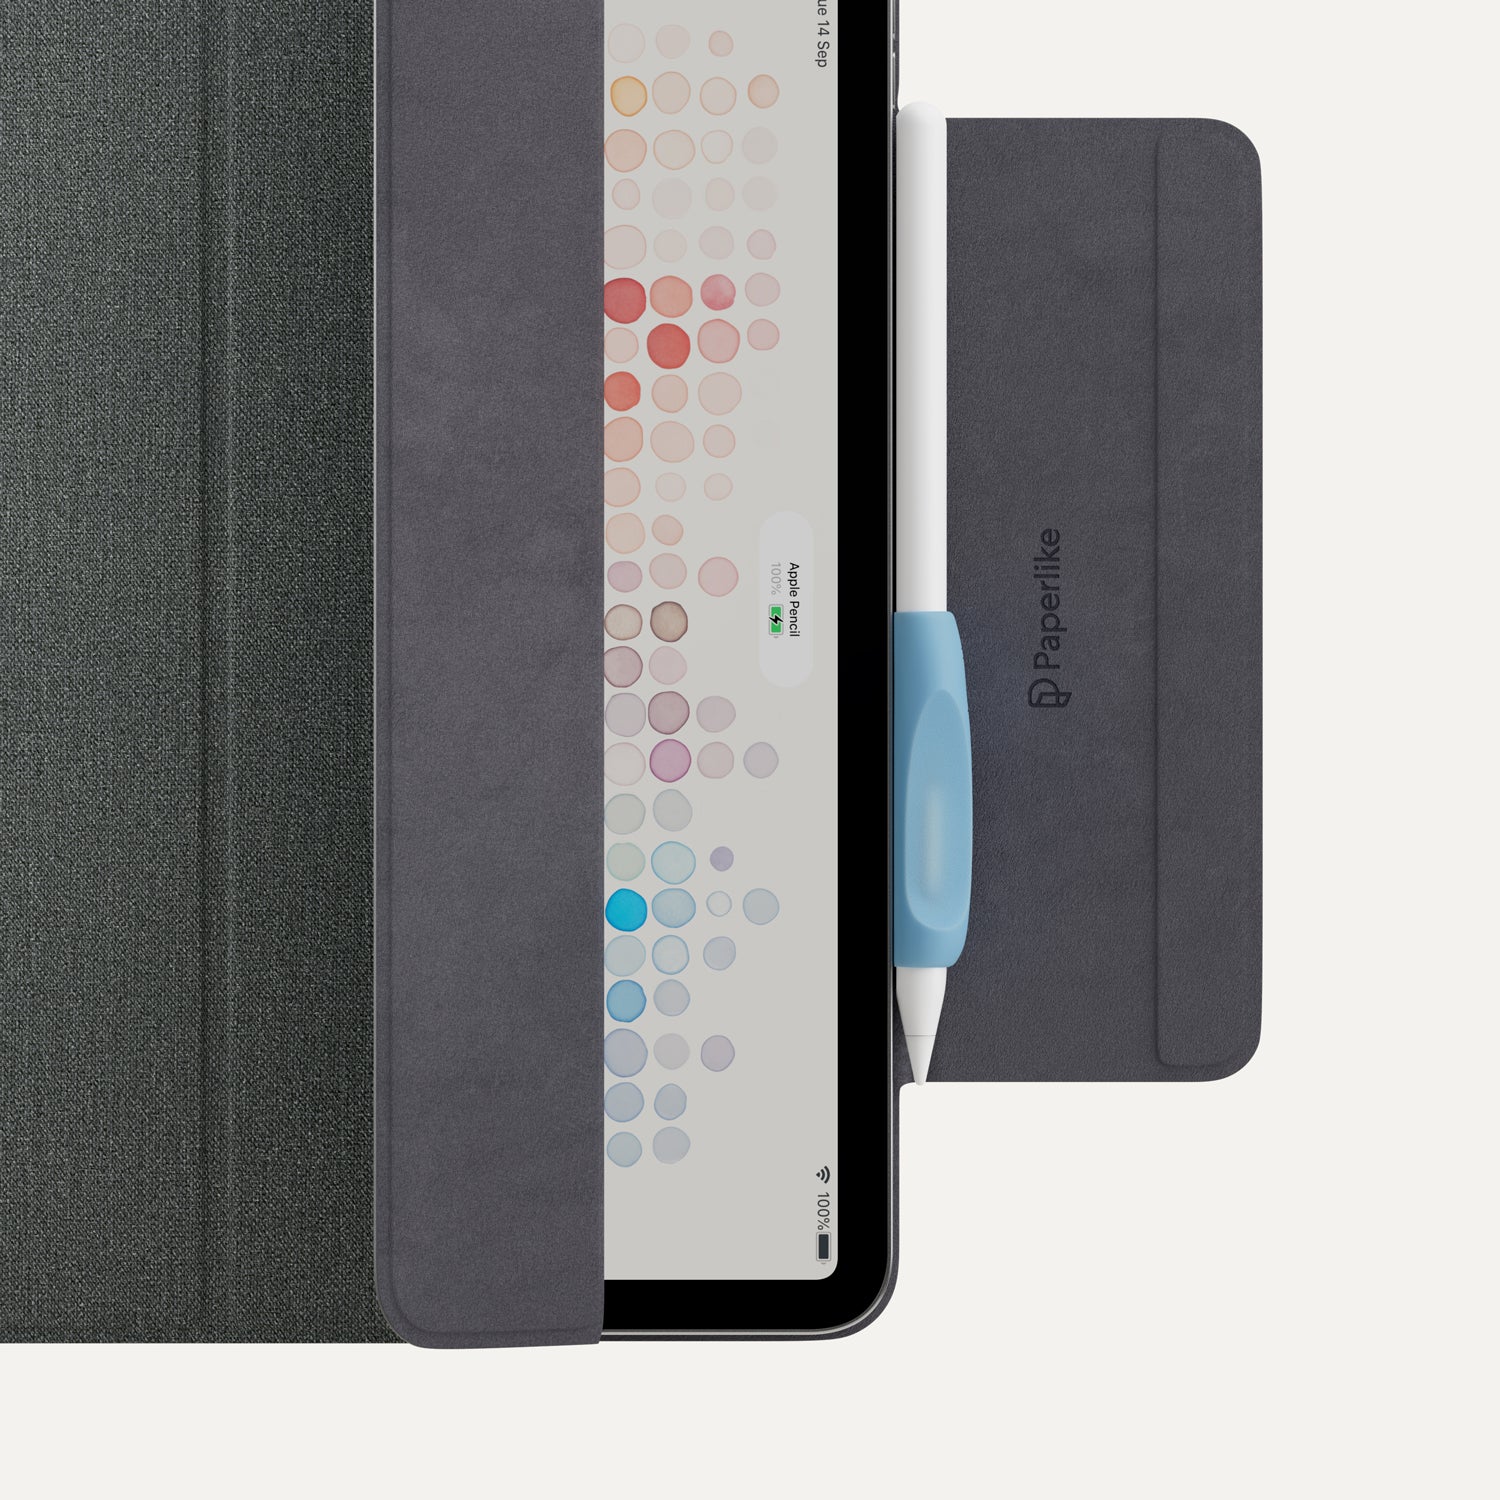 A Paperlike pencil grip on an Apple pencil next to an Apple iPad with a Paperlike case